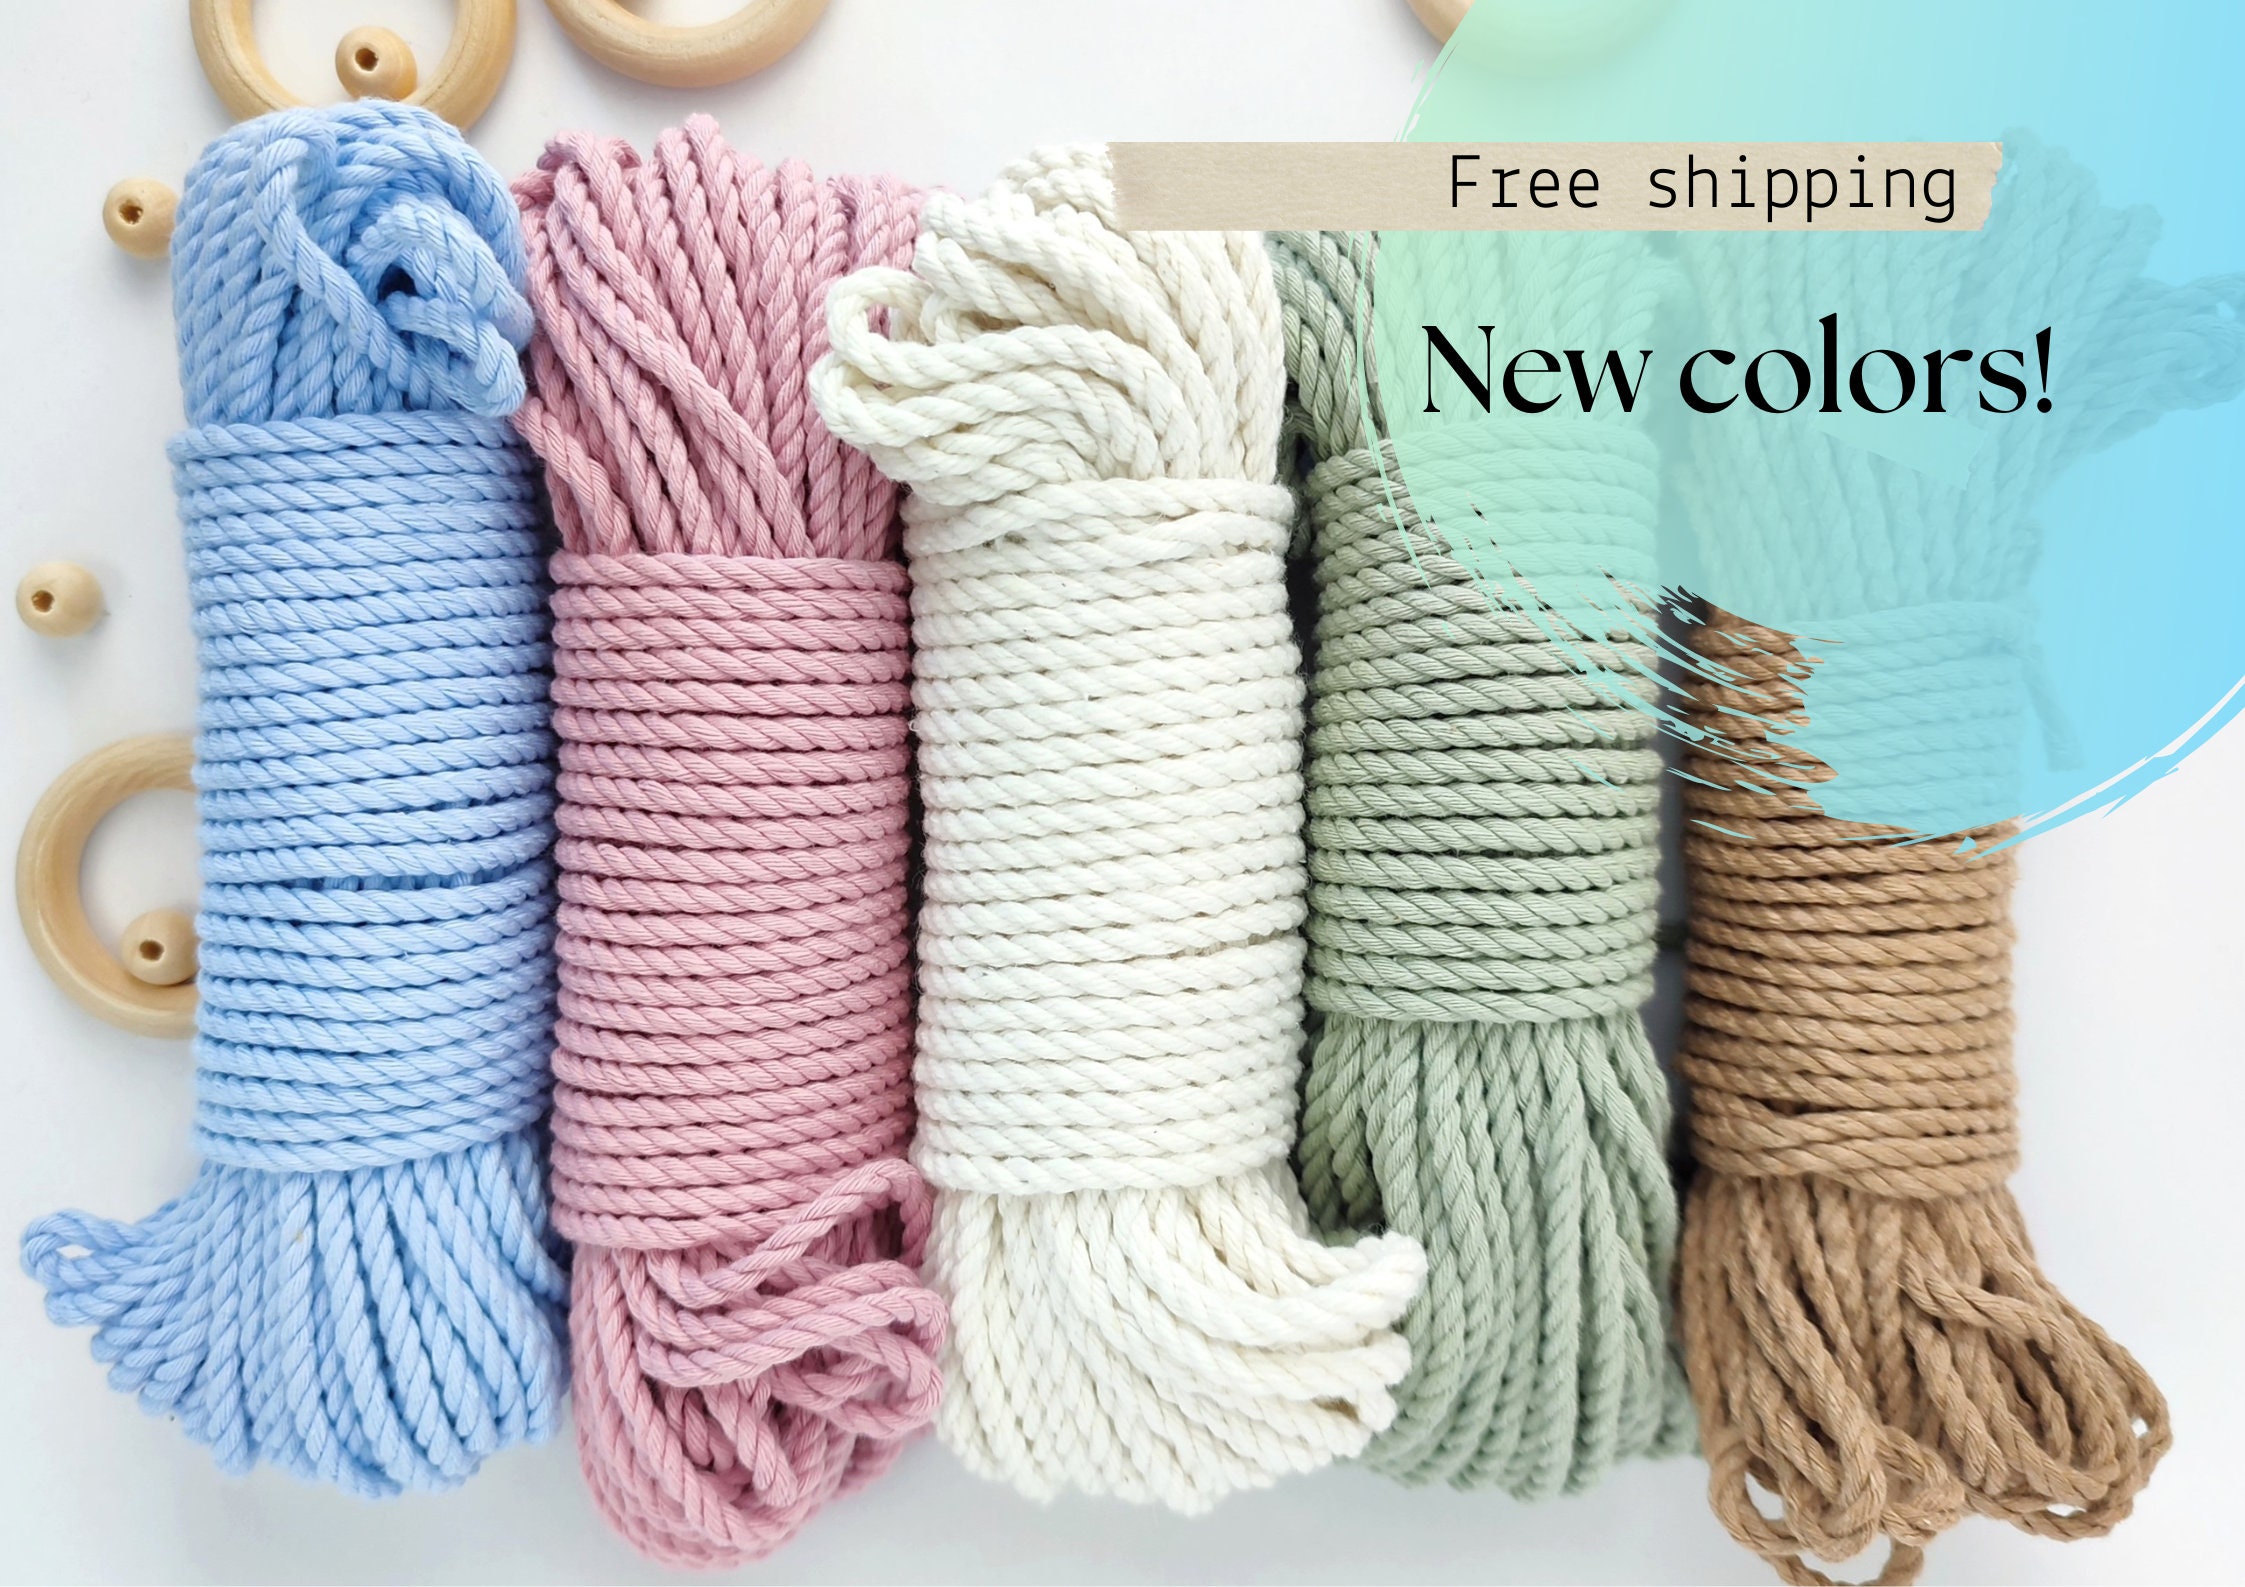 Incraftables 5mm Rope Cord (10 Colors). Best Cotton Macrame Cord